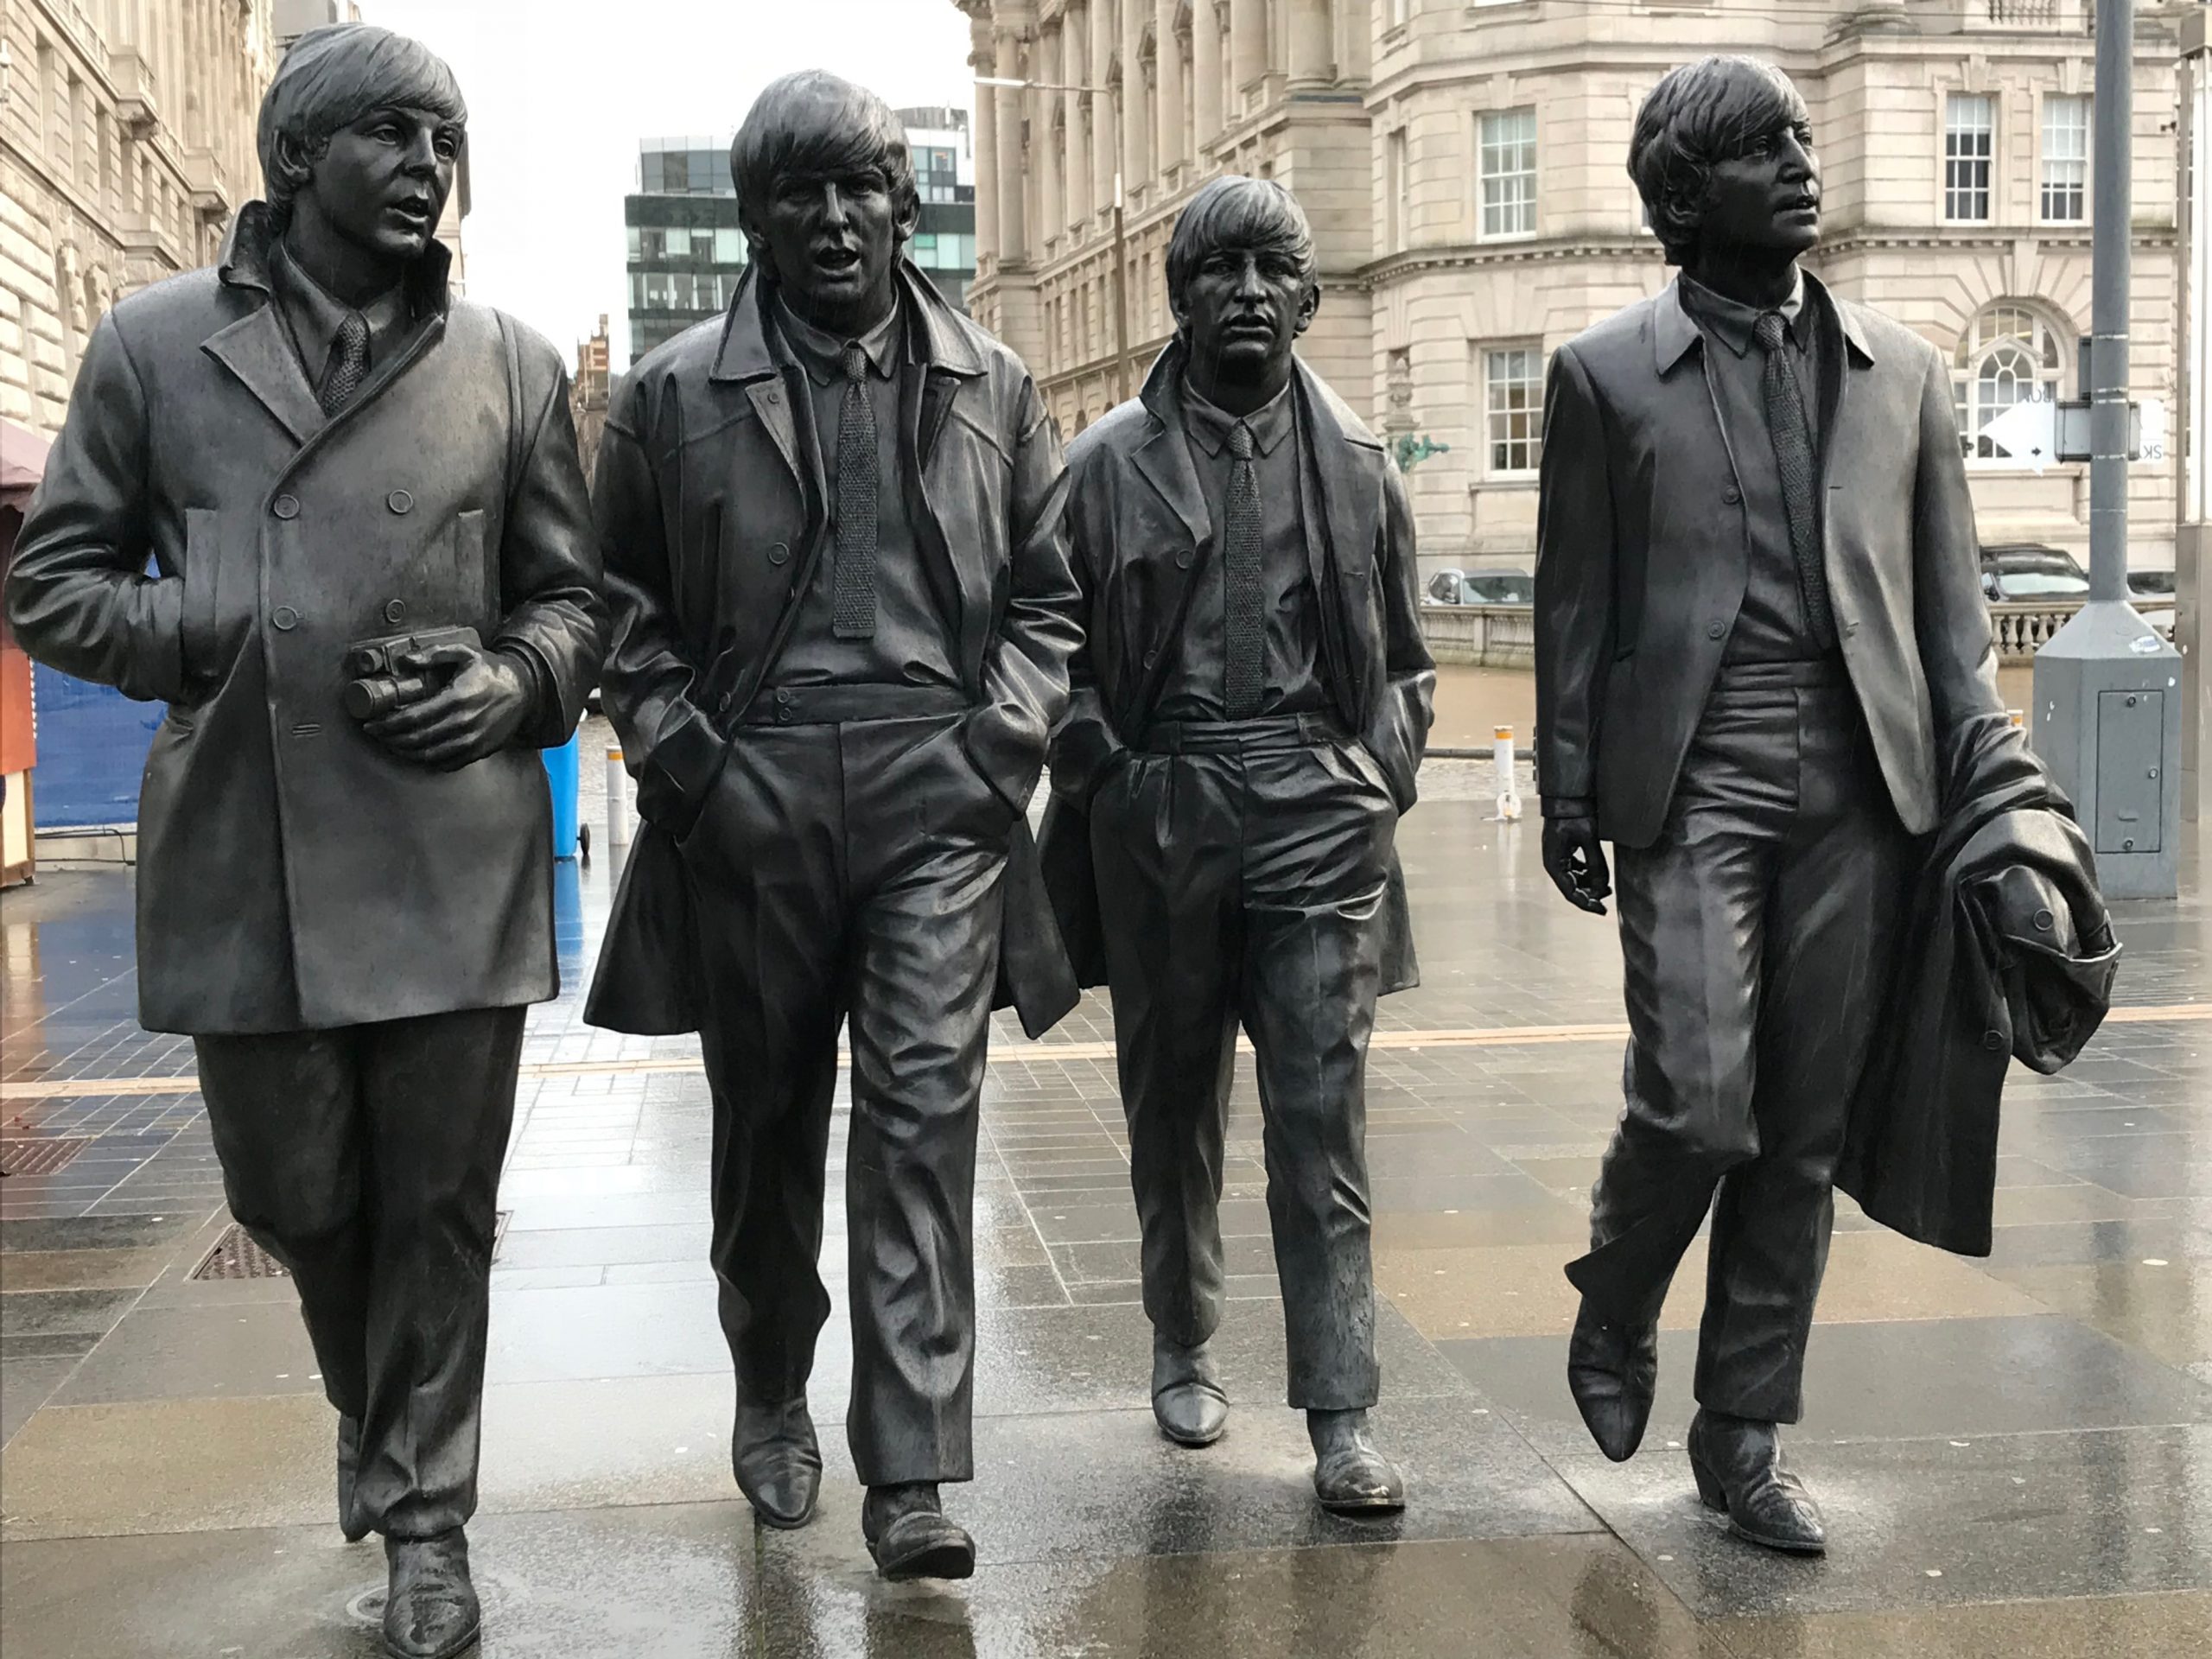 Statue of the Beatles in Liverpool quarters